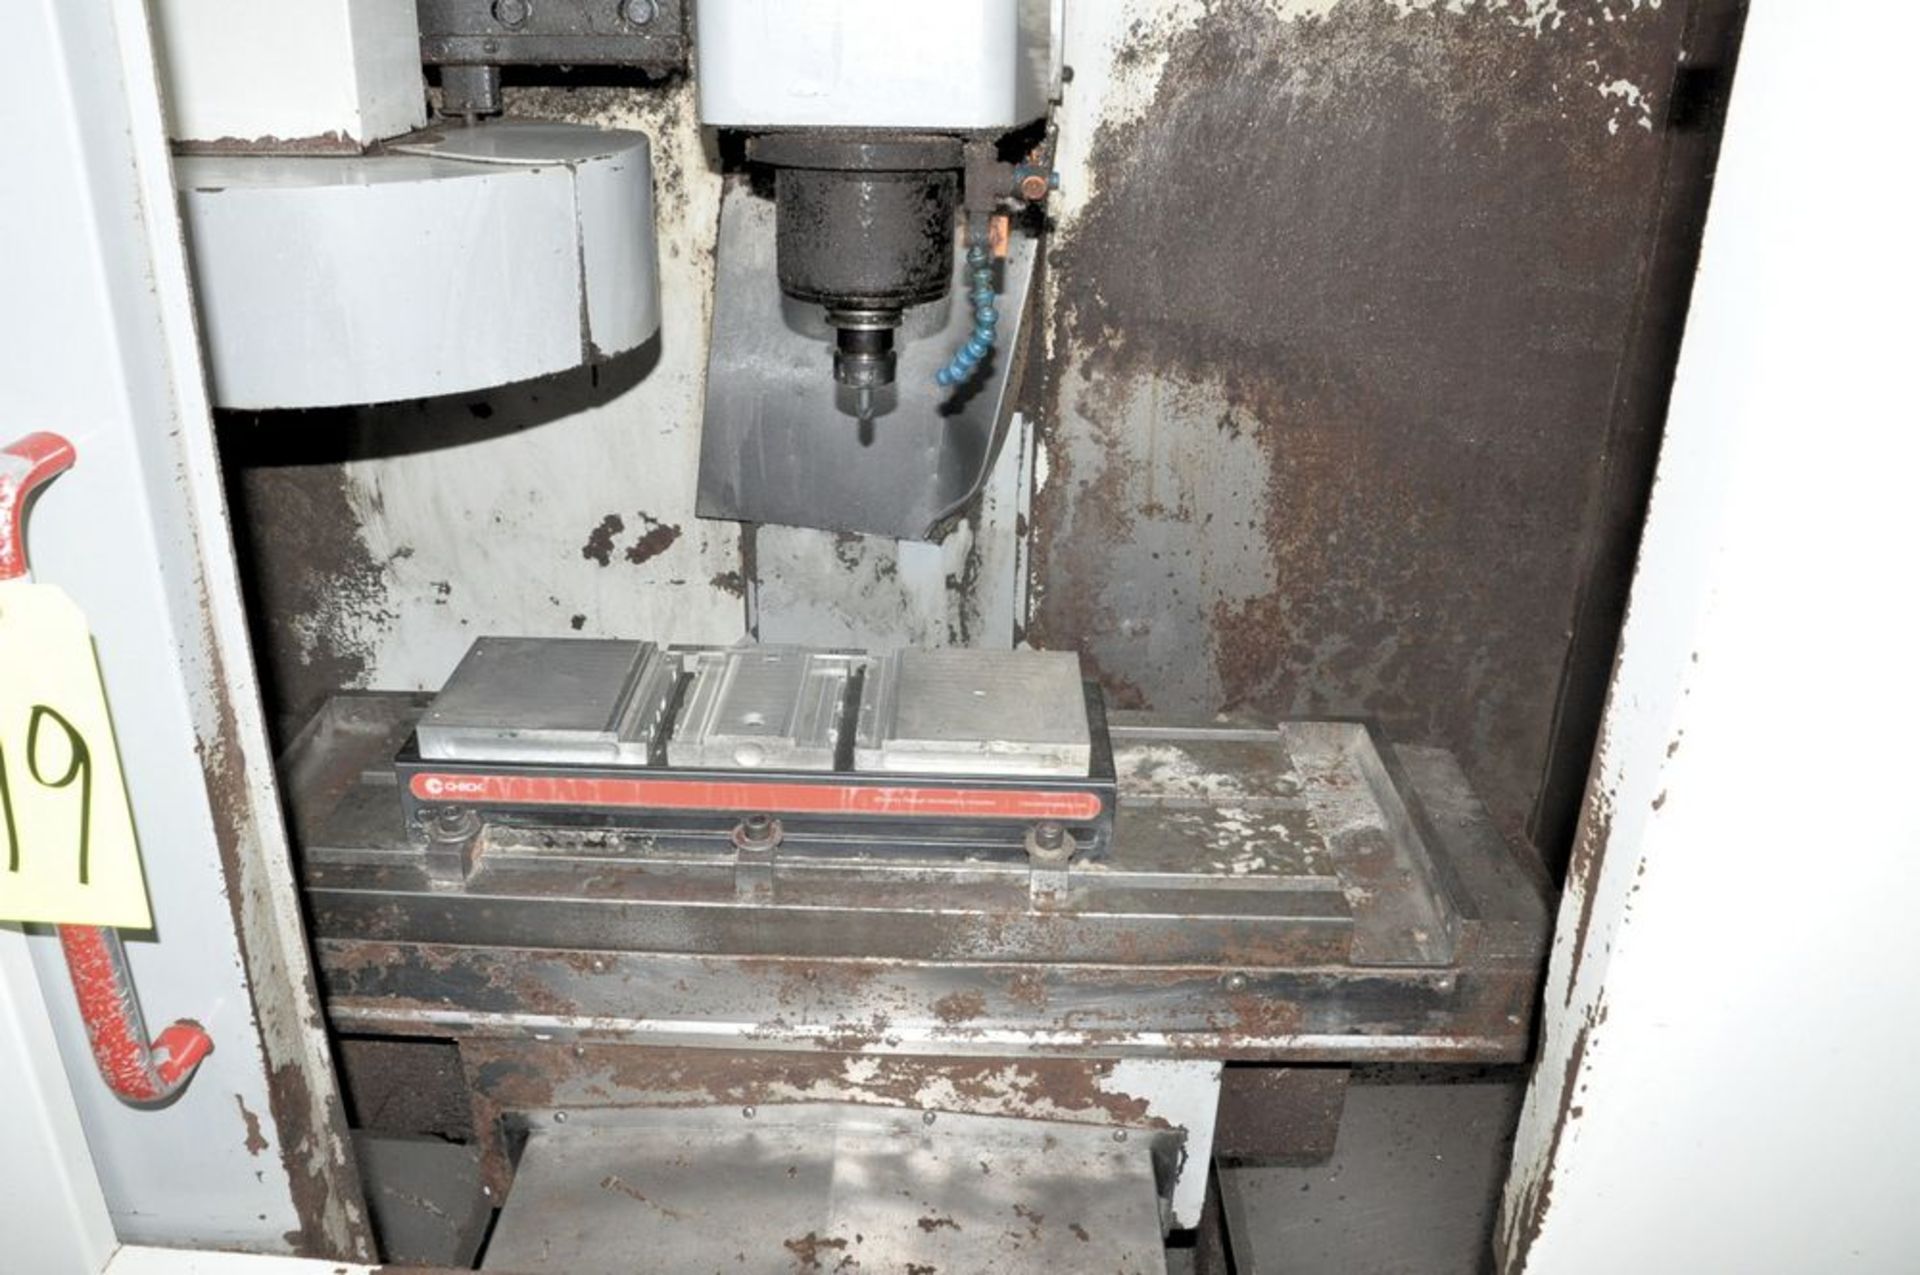 Haas Model Mini-Mill CNC Vertical Machining Center, S/n 26993 - Image 7 of 8